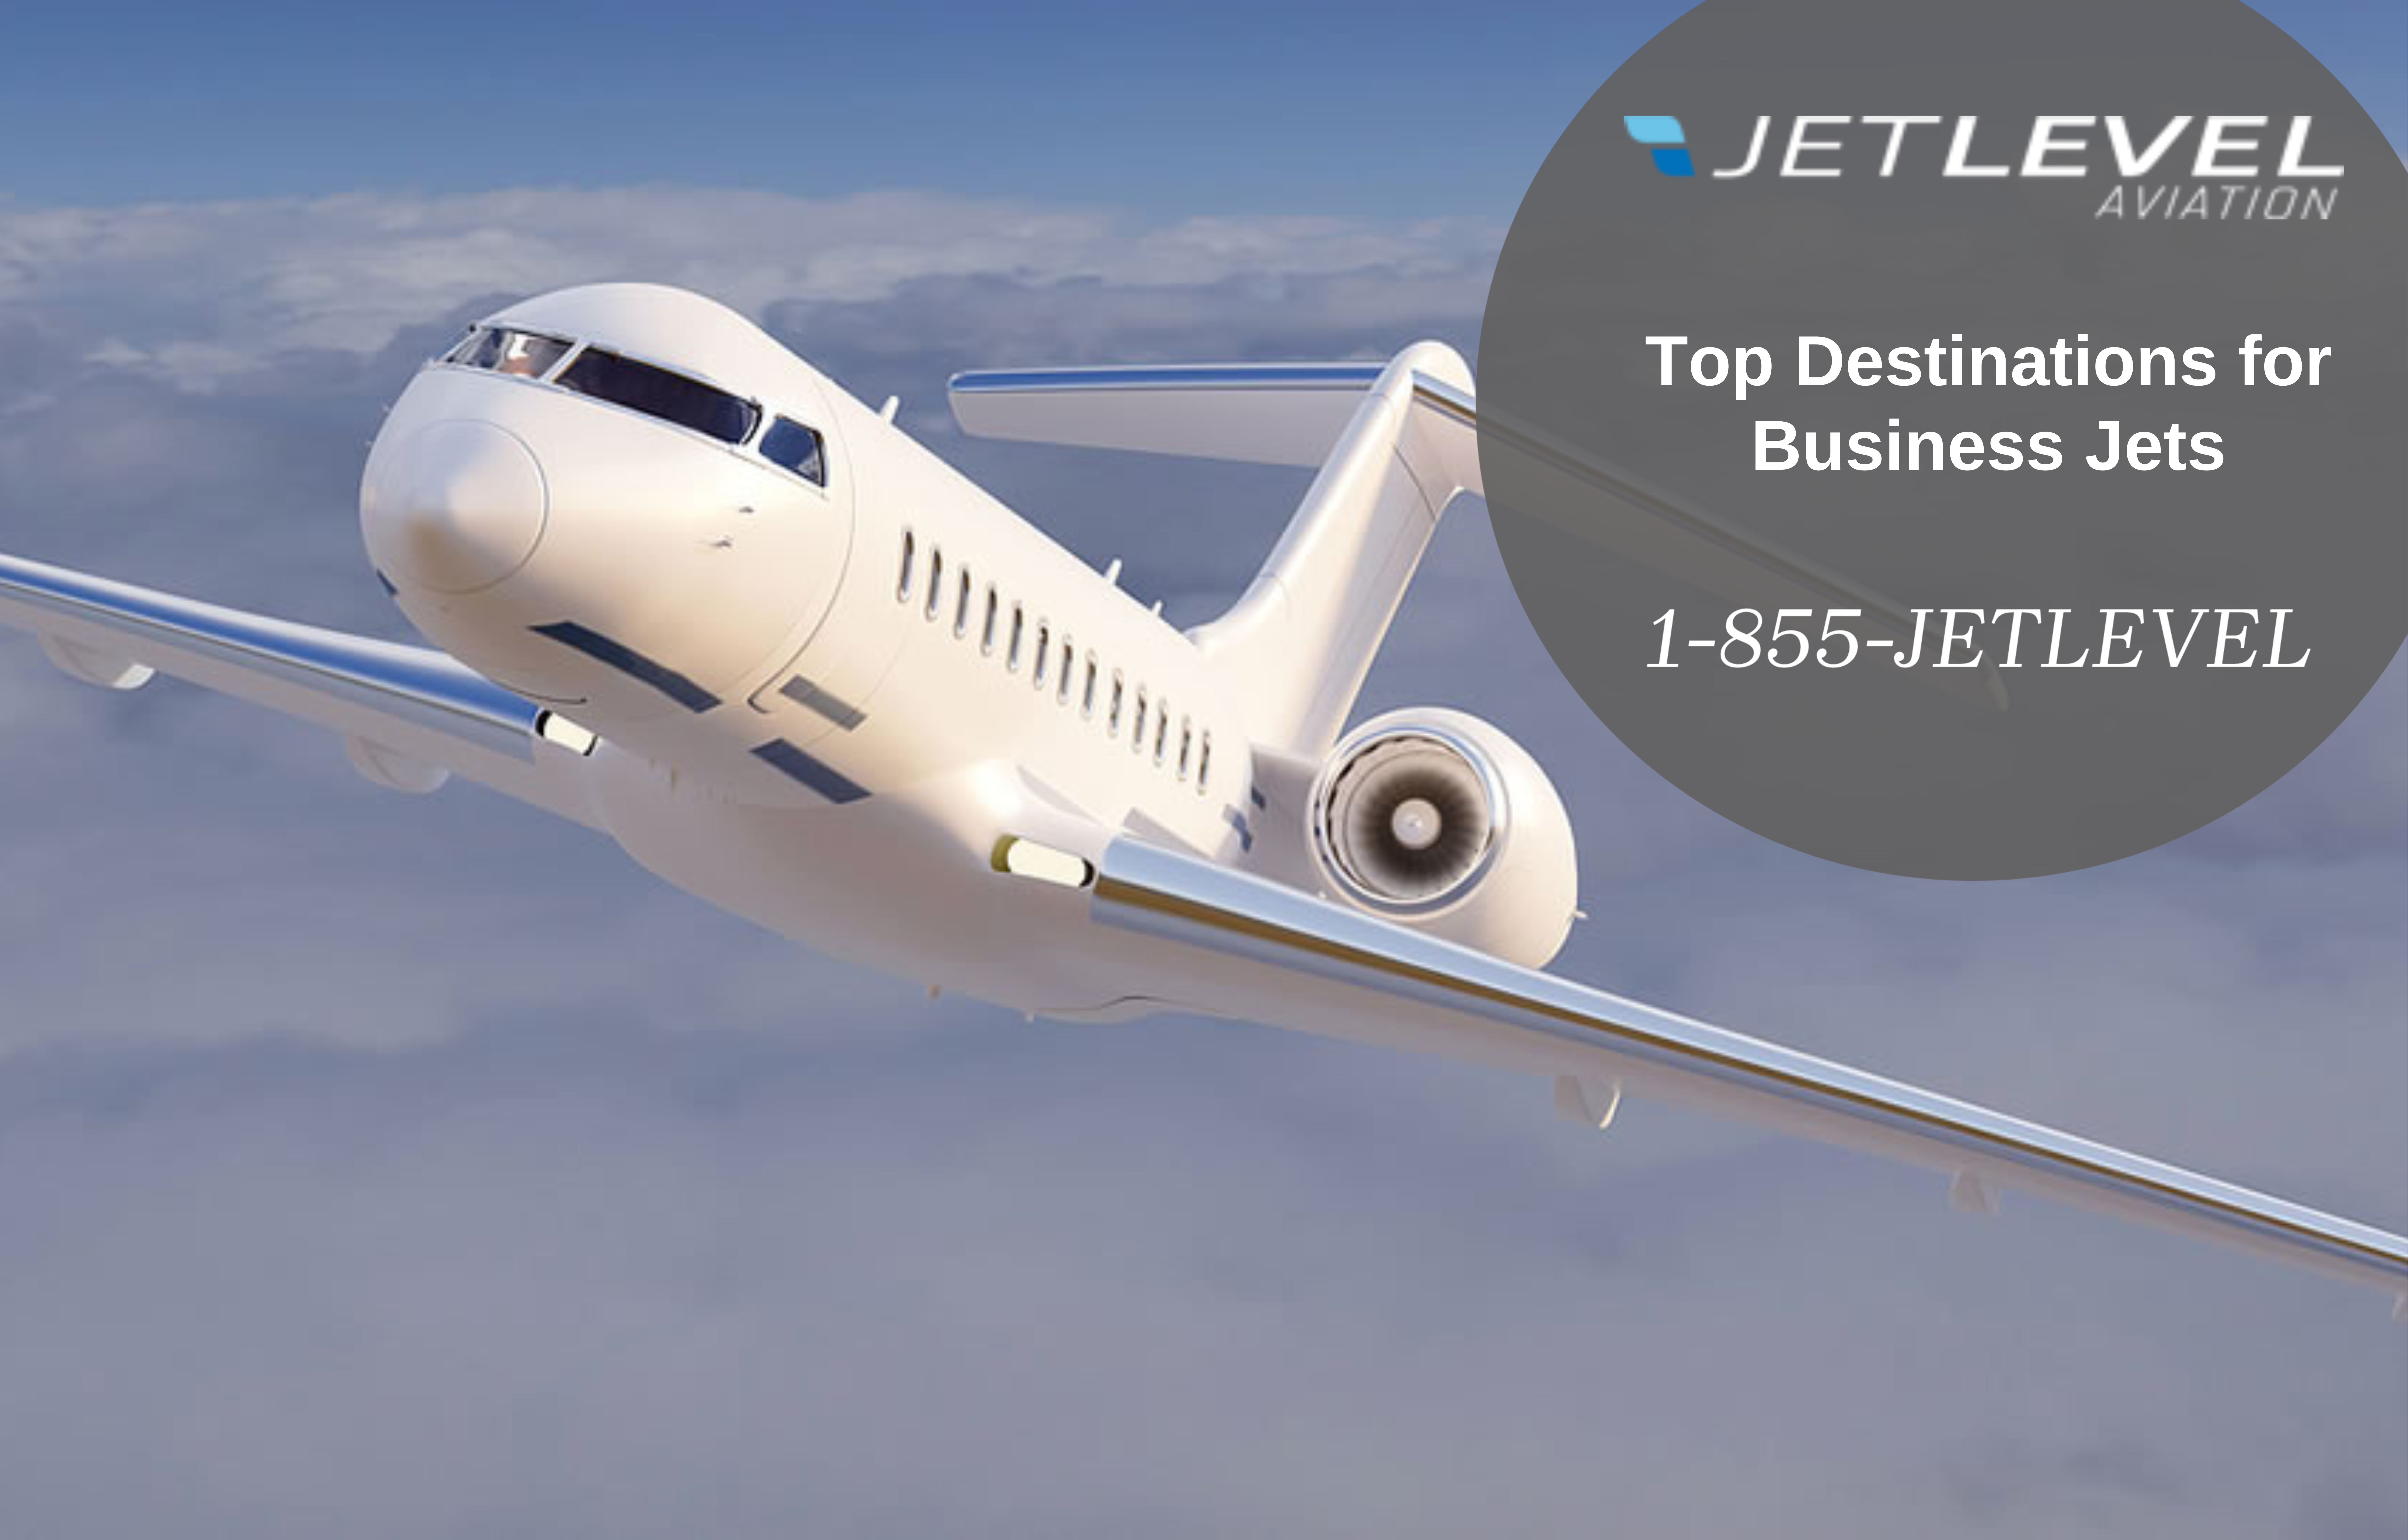 Top Destinations for Business Jets